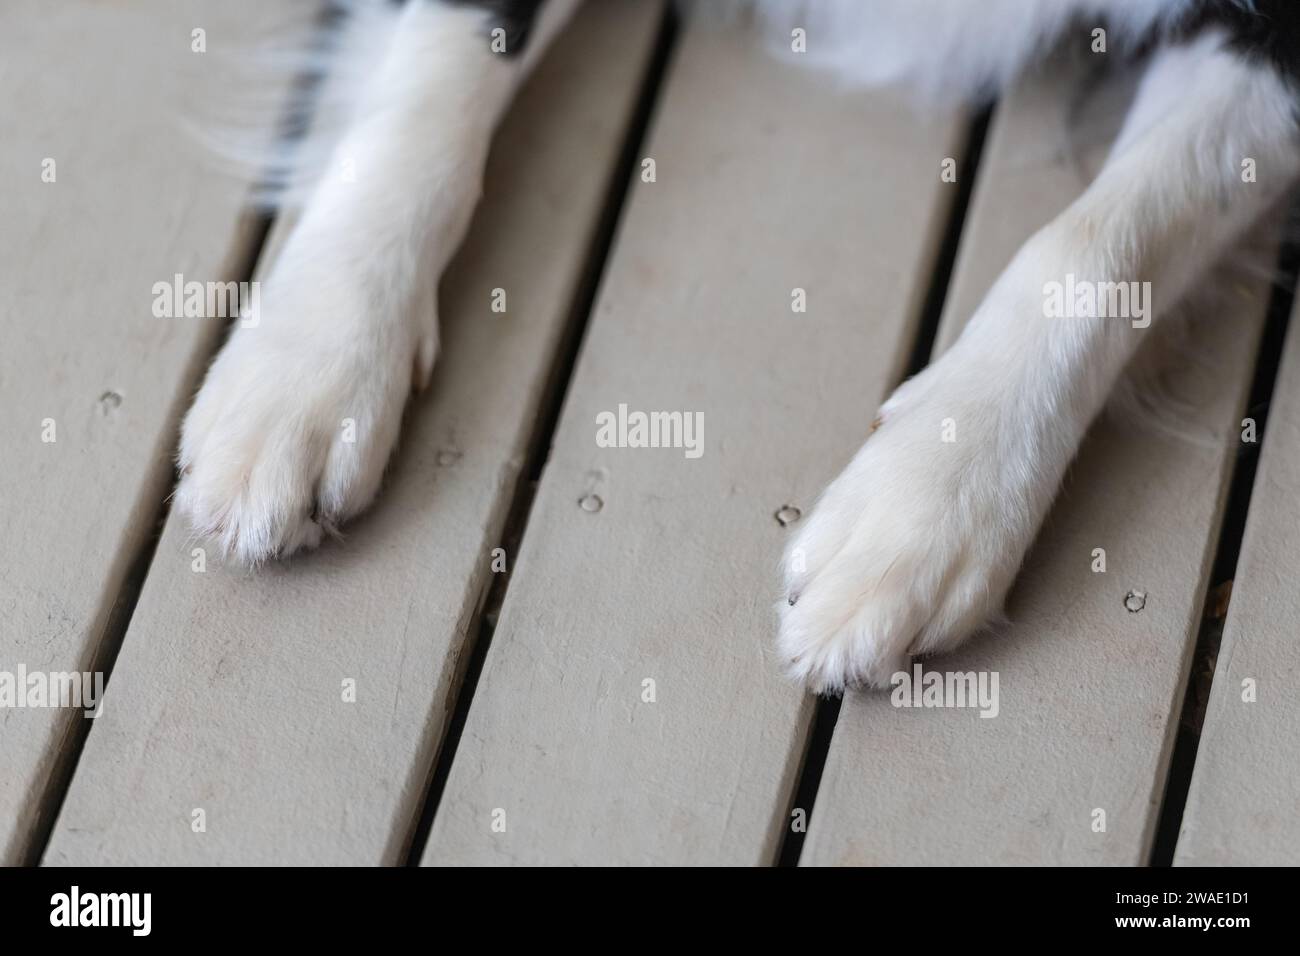 Close up of a dog's paws. Border Collie puppy pads. Legs of animal lying on a wooden deck. Stock Photo